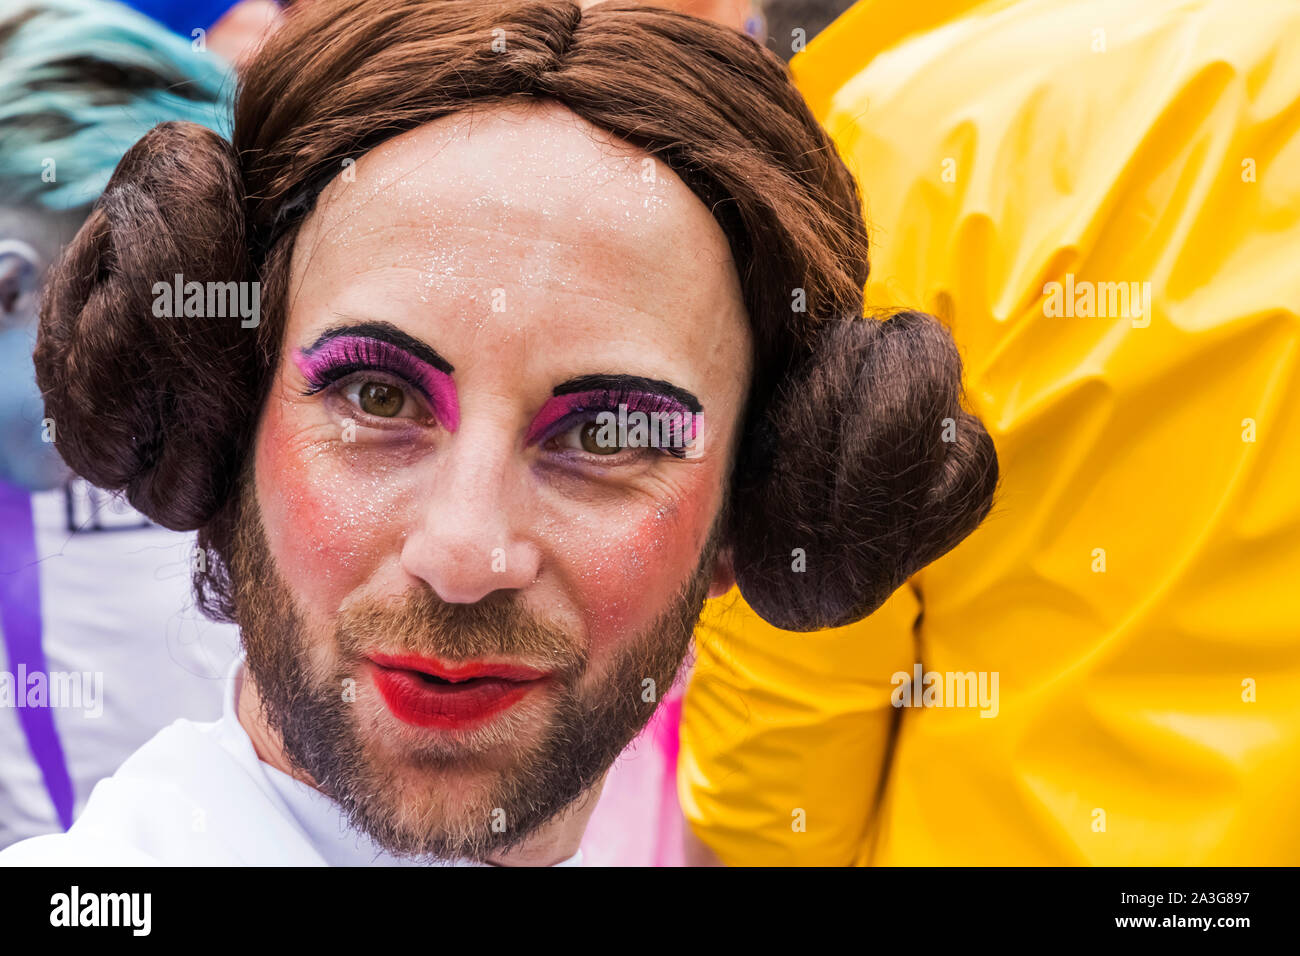 England, London, The Annual Pride Festival, Portrait of Bearded Male Parade Participant Dressed Princess Leia from The Star Wars Movie Stock Photo